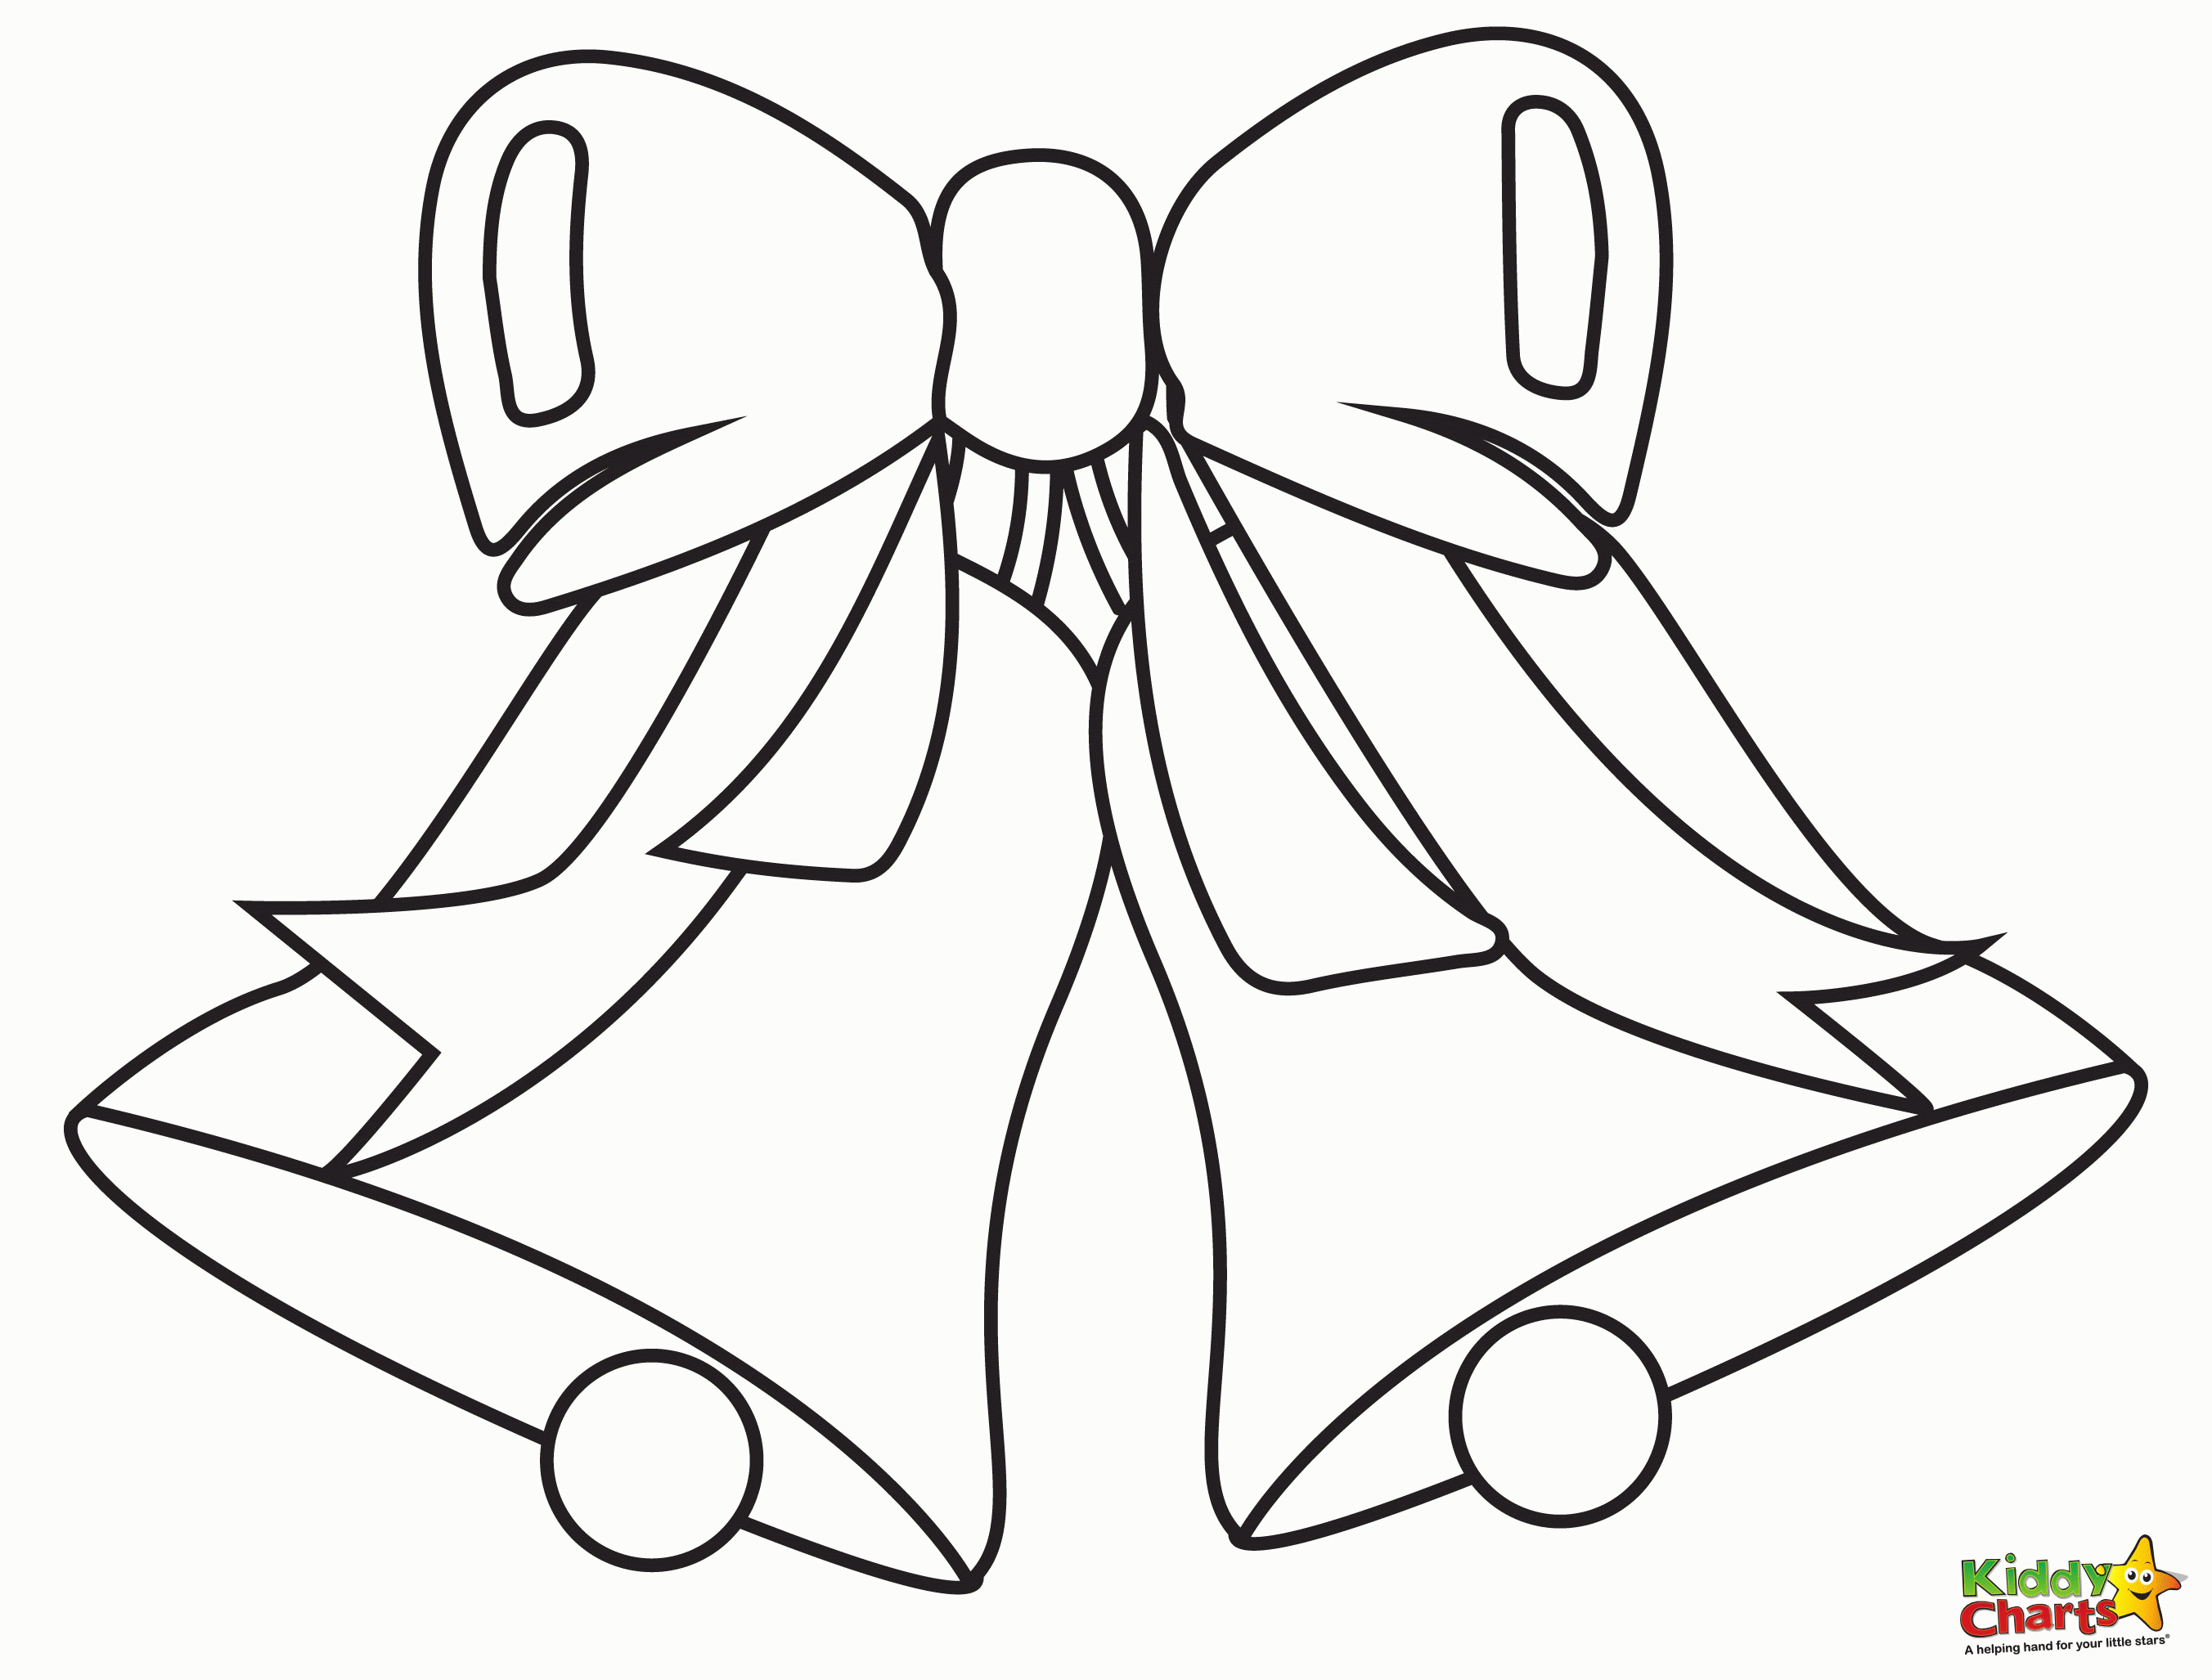 Free Coloring Pages Of Christmas Bells Download Free Coloring Pages Of Christmas Bells Png Images Free Cliparts On Clipart Library